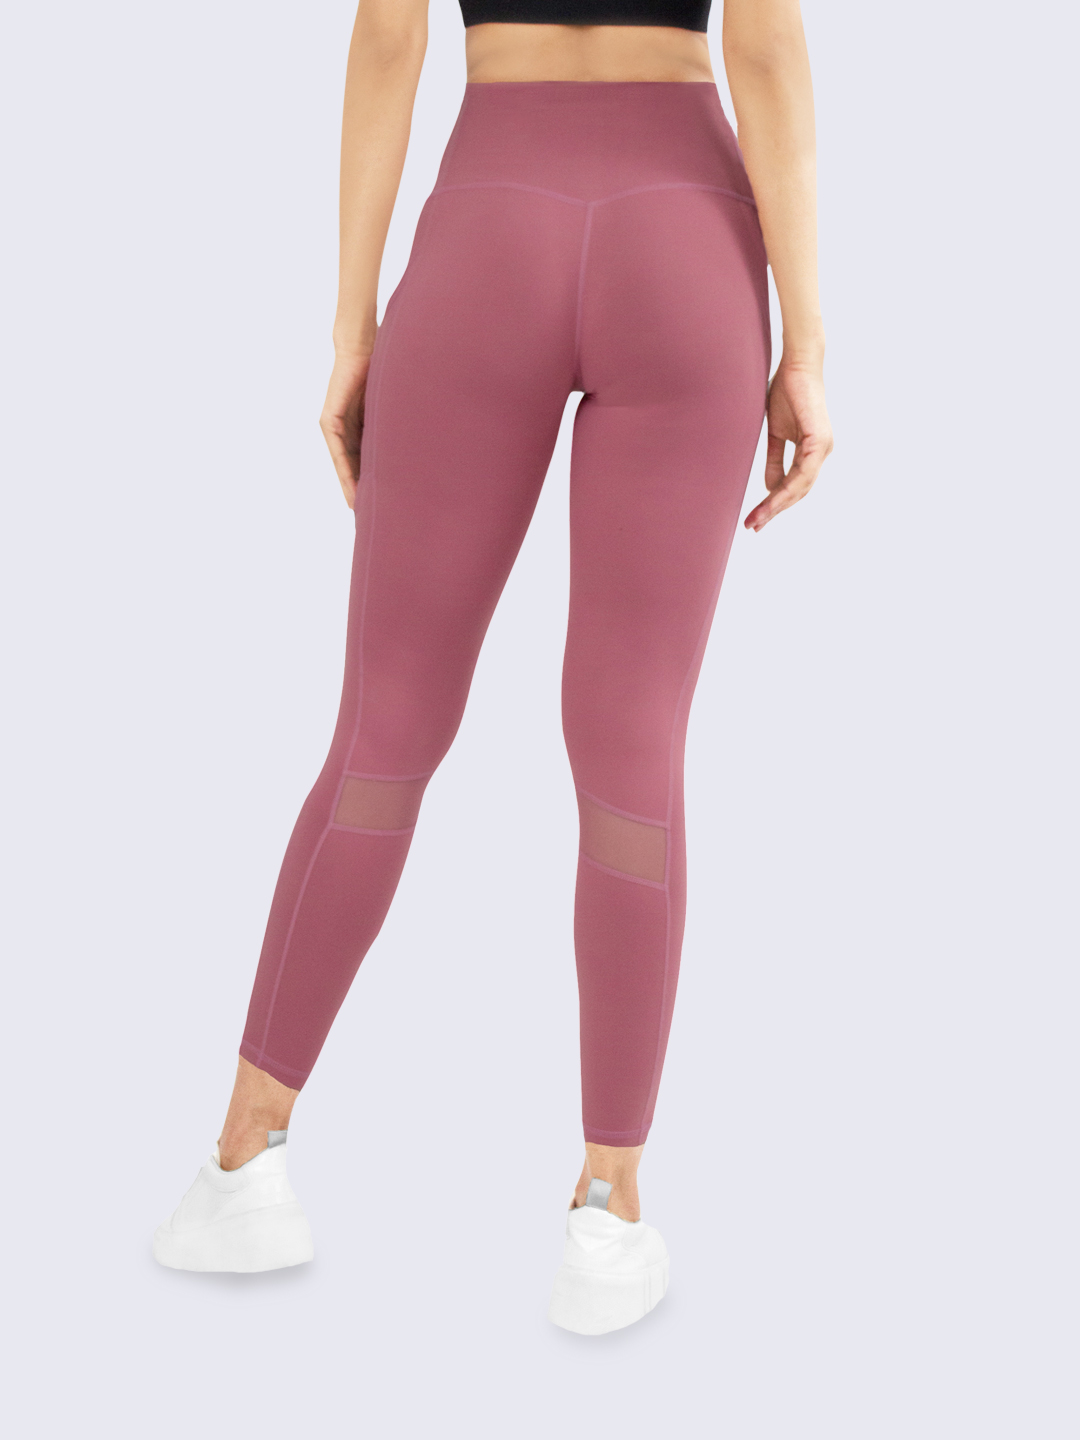 Mimi by Michelle Salins I Look Tall Full Length Nylon Leggings – Pink back view